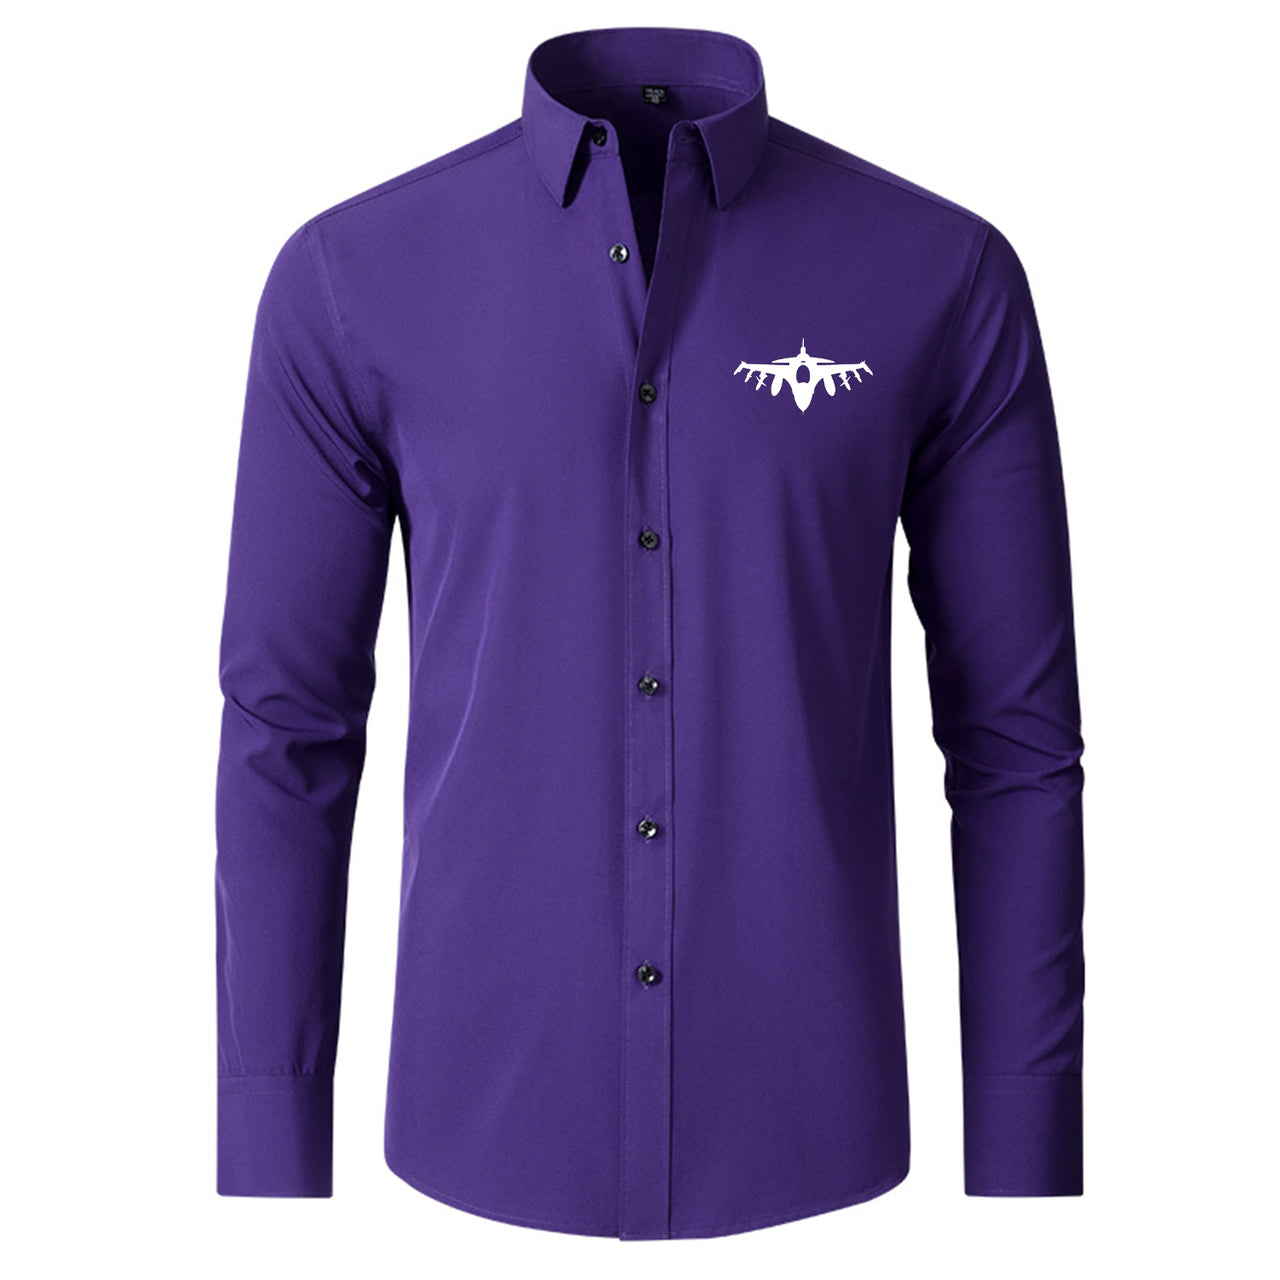 Fighting Falcon F16 Silhouette Designed Long Sleeve Shirts